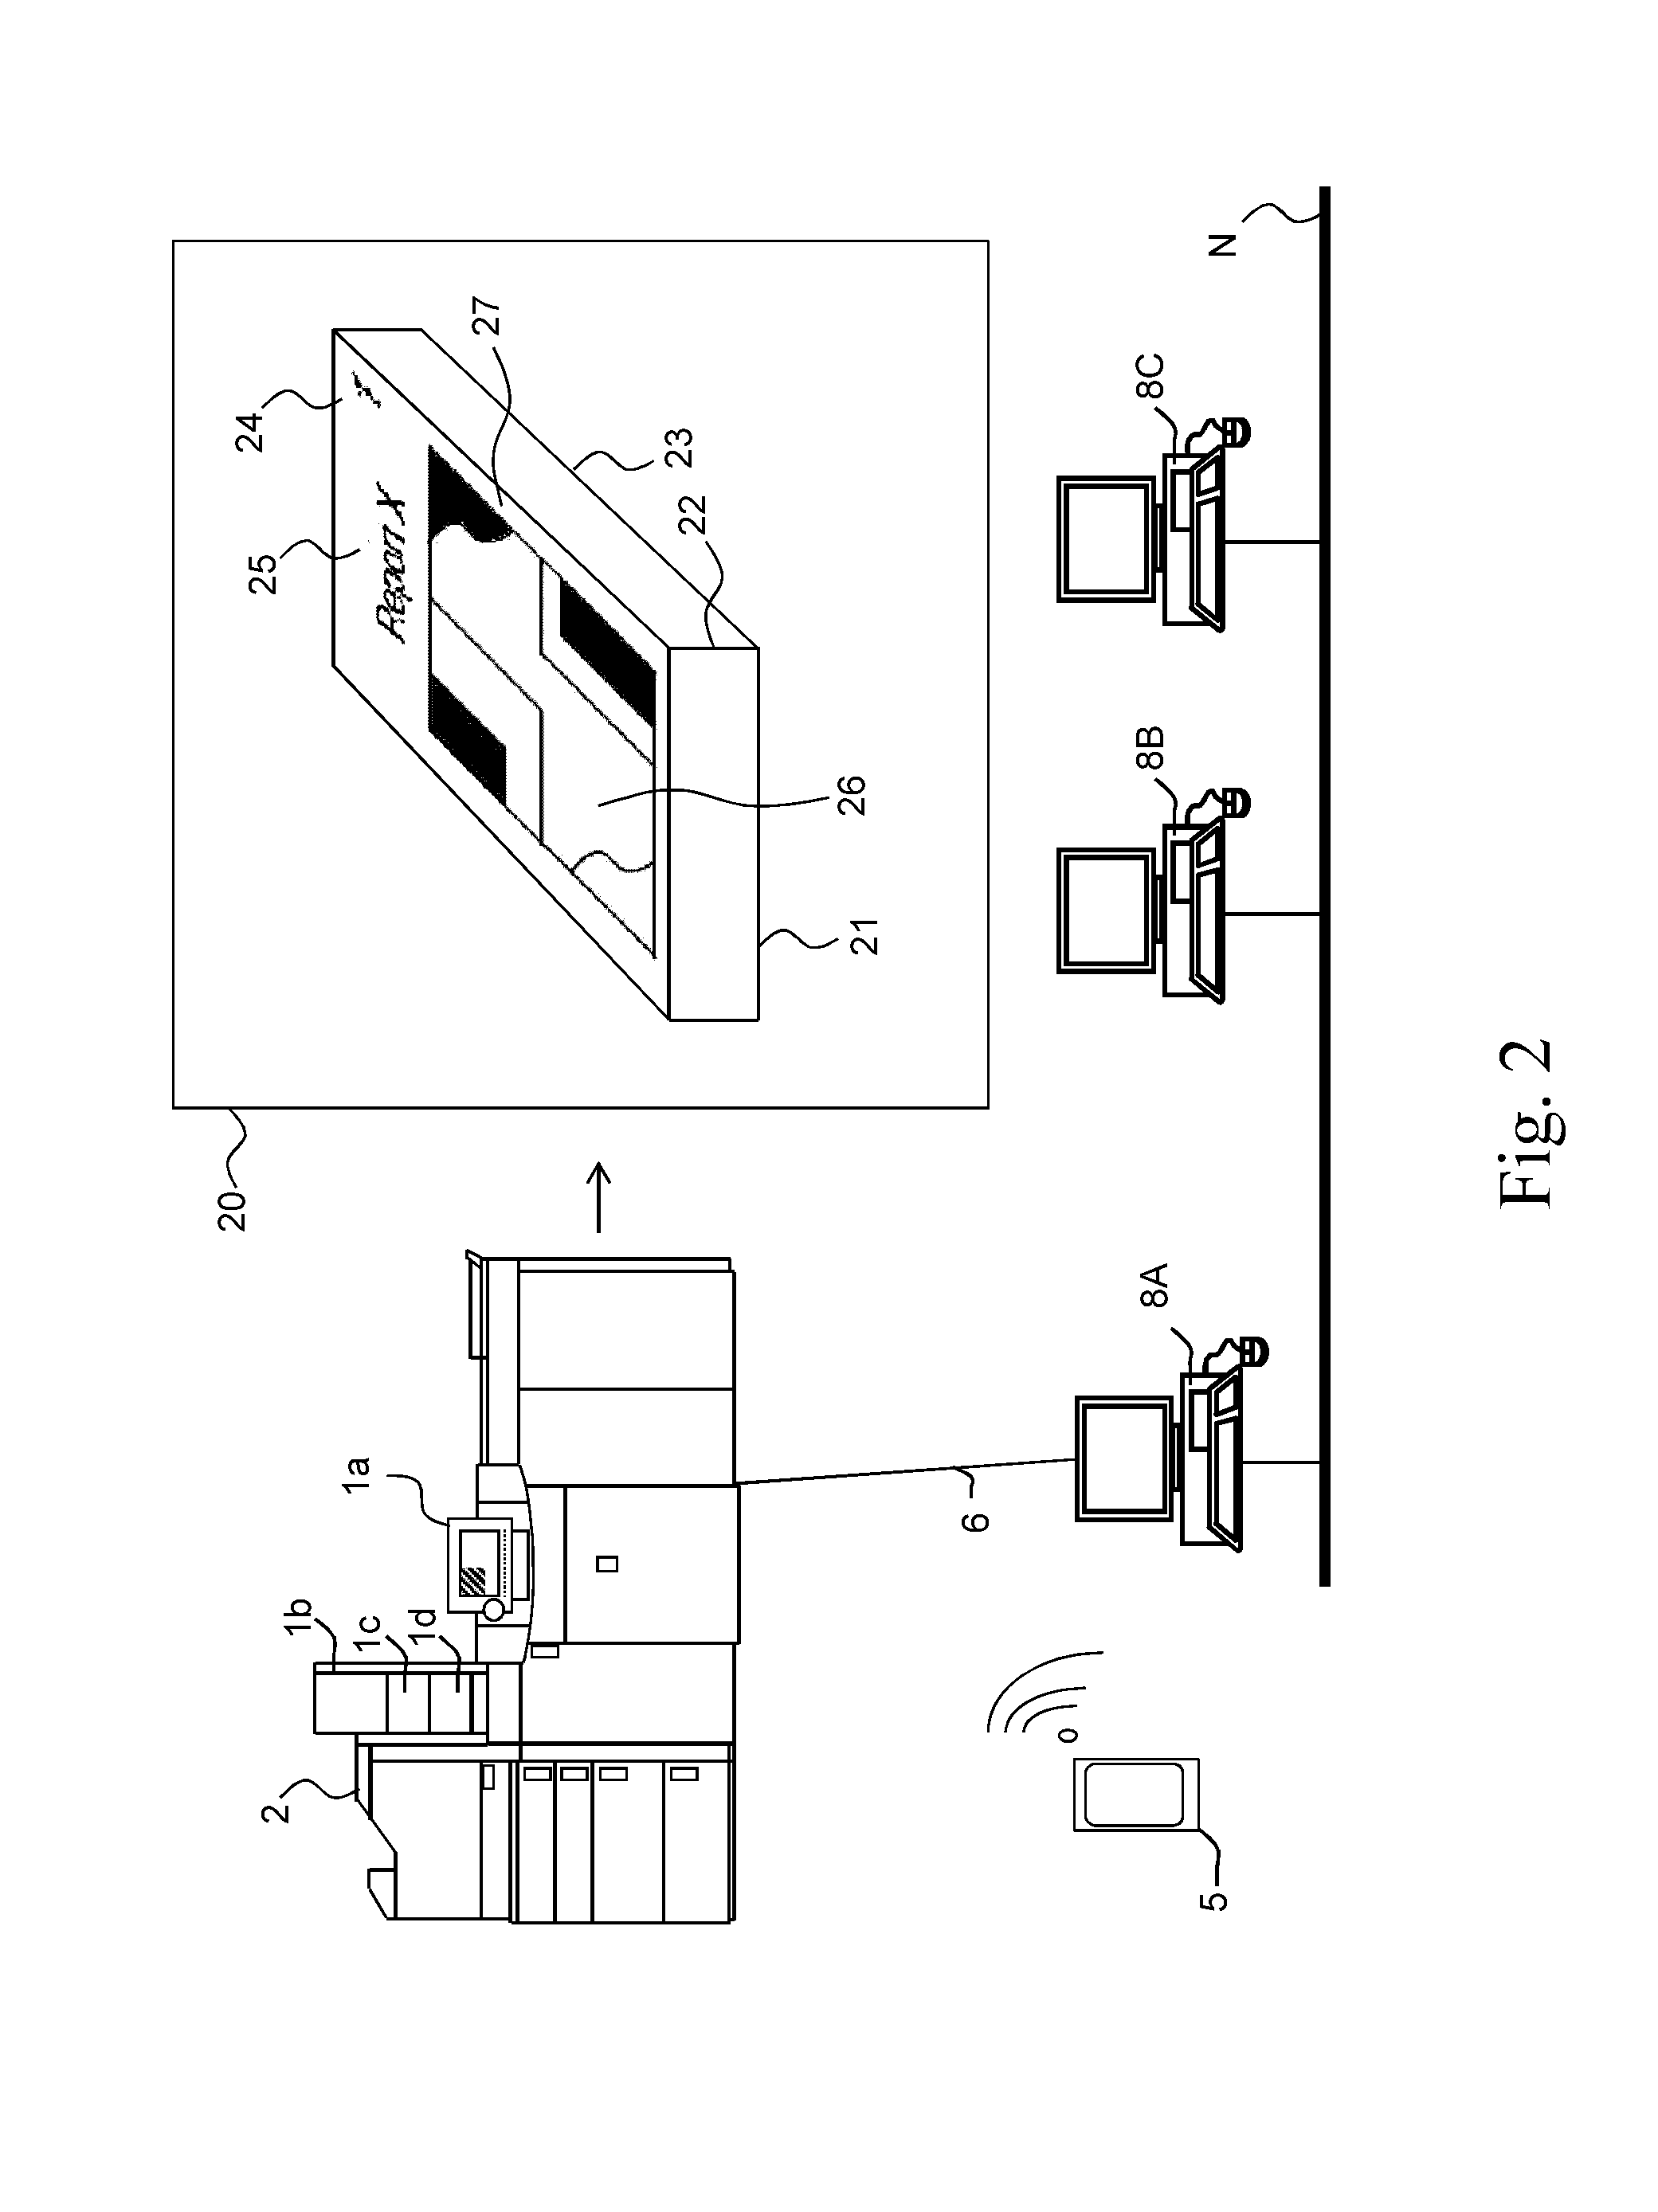 Method for tracking of intermediate products in a printing system